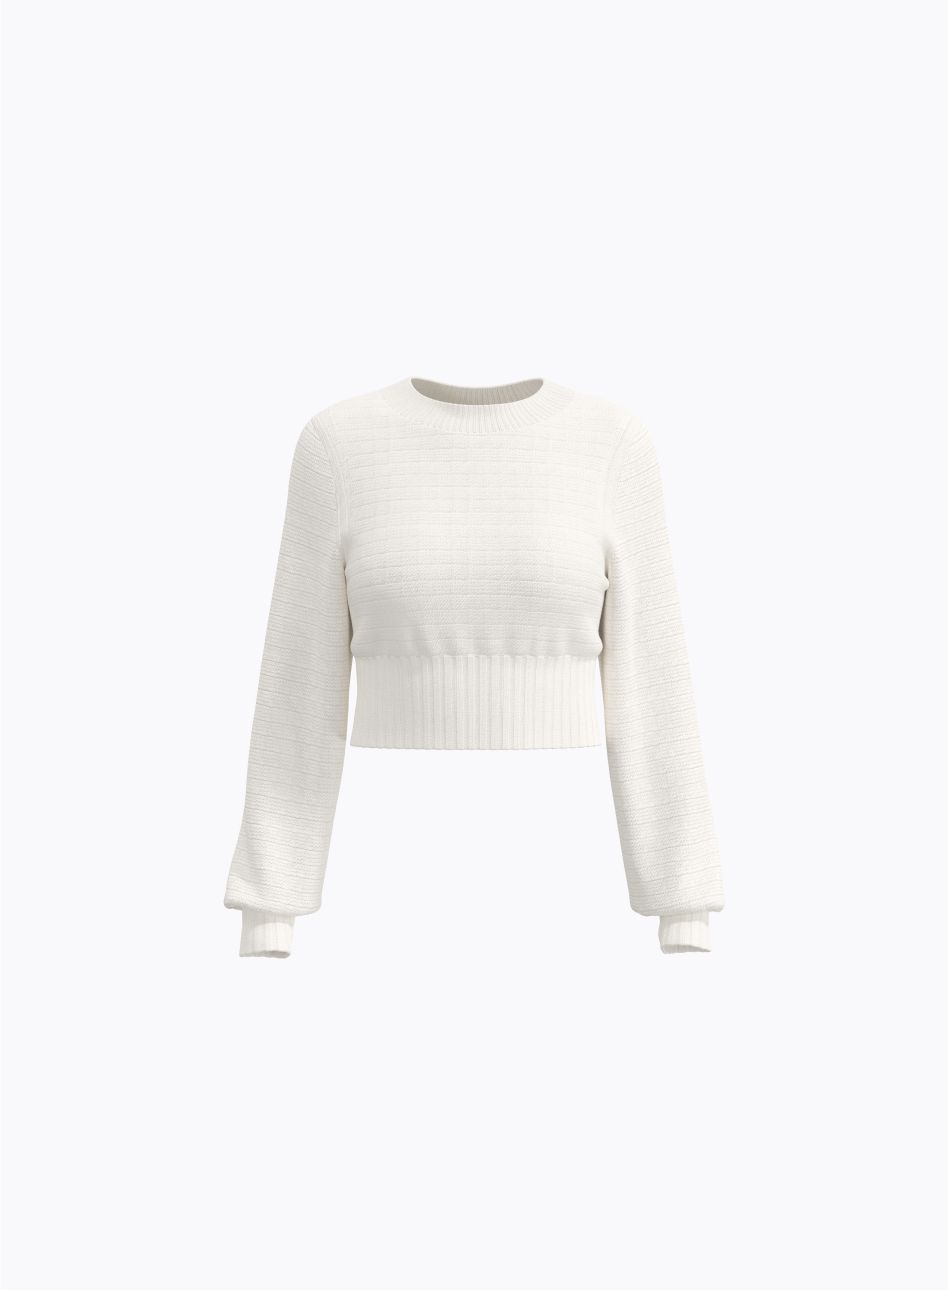 A beige cable knit sweater.